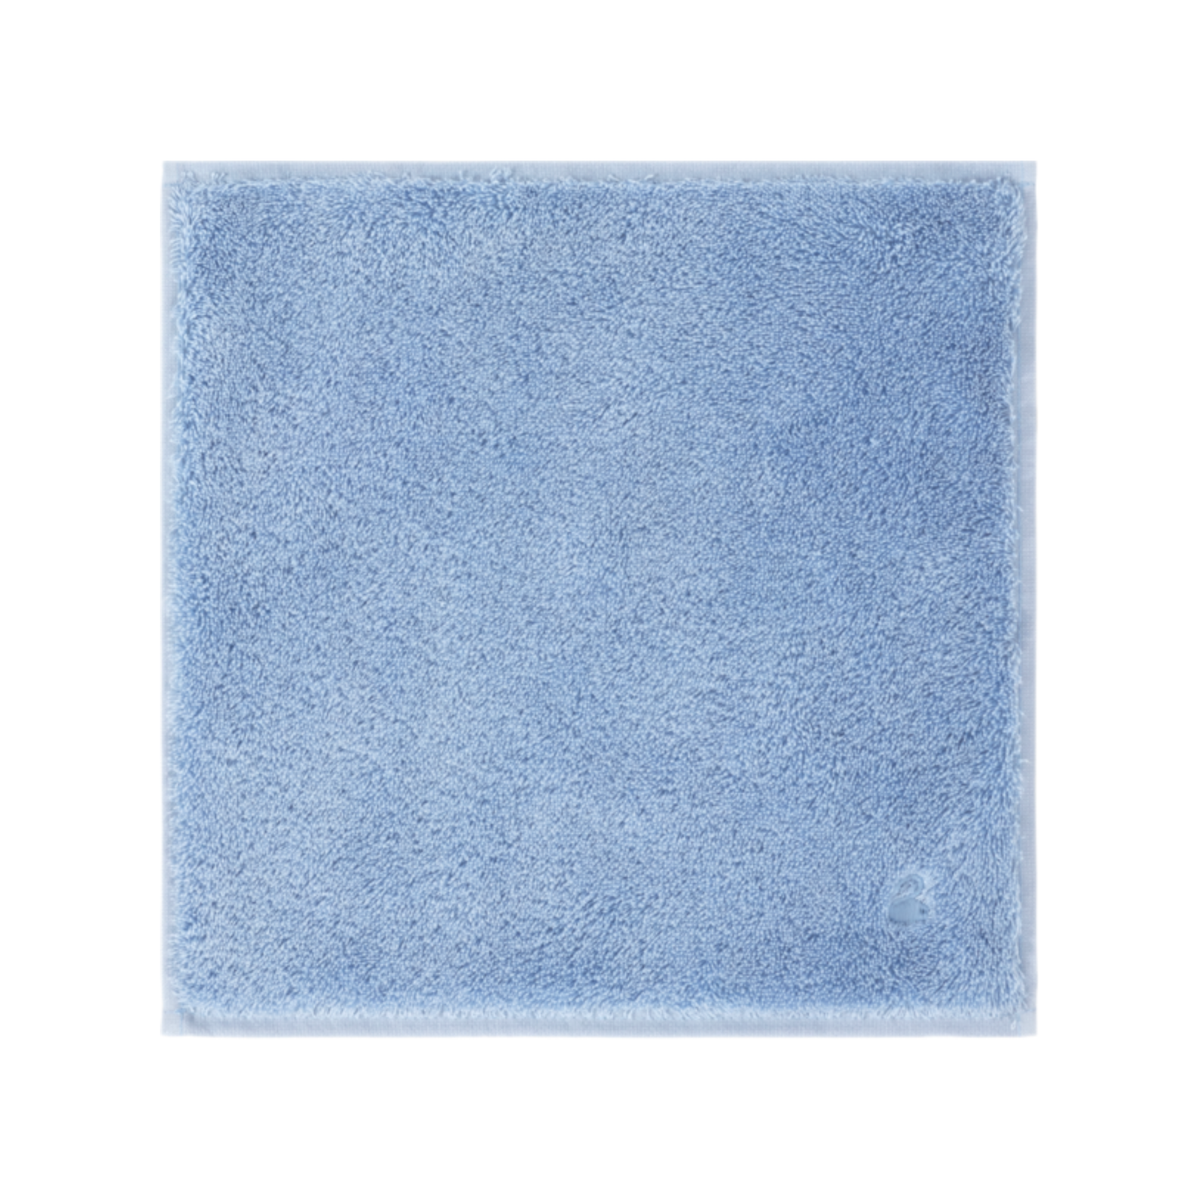 Wash Cloth of Yves Delorme Etoile Bath Towels in Azure Color